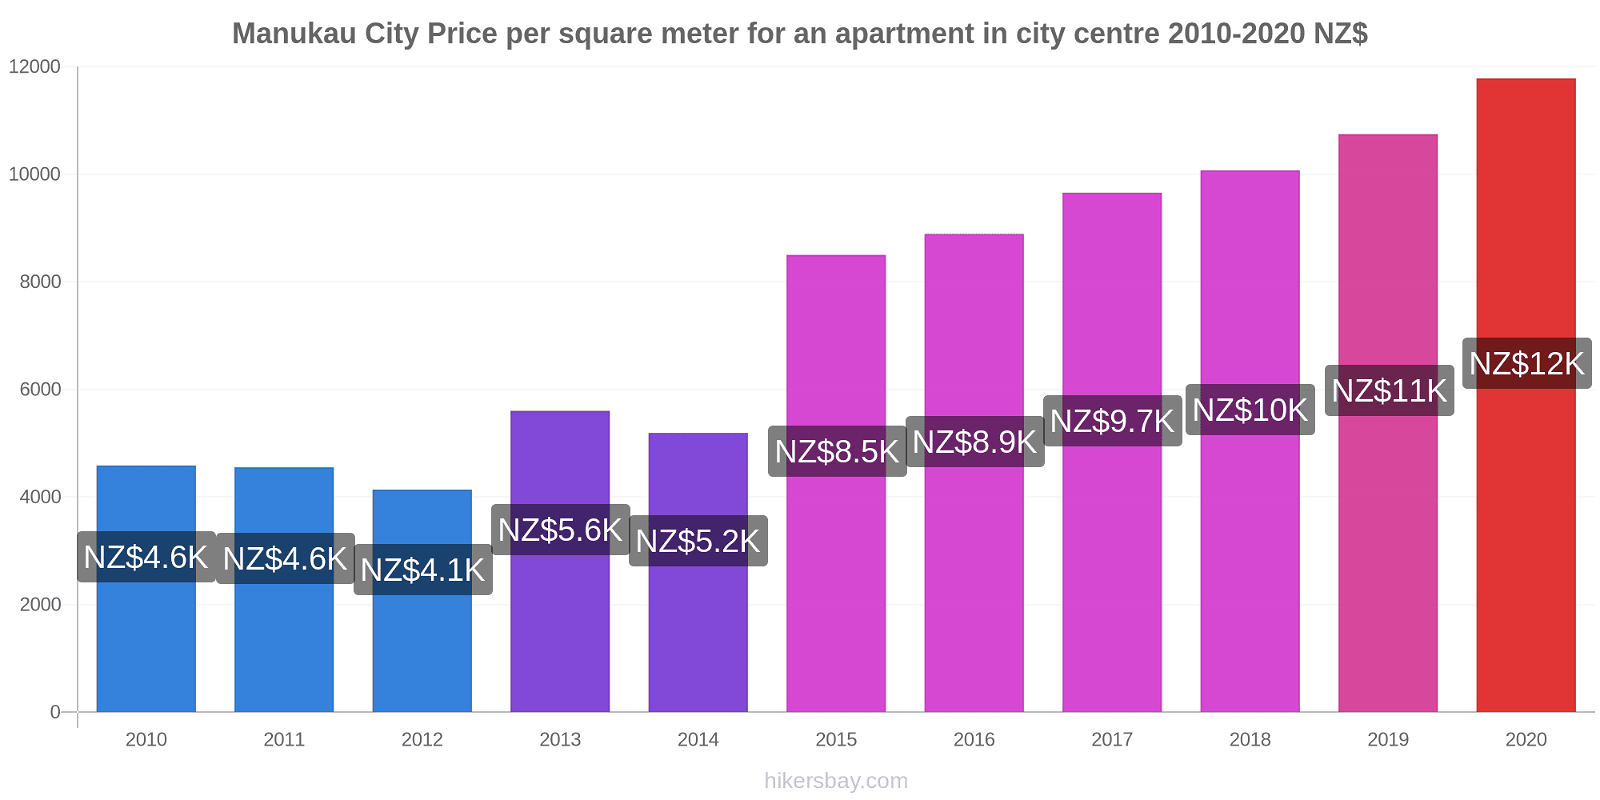 Manukau City price changes Price per square meter for an apartment in city centre hikersbay.com